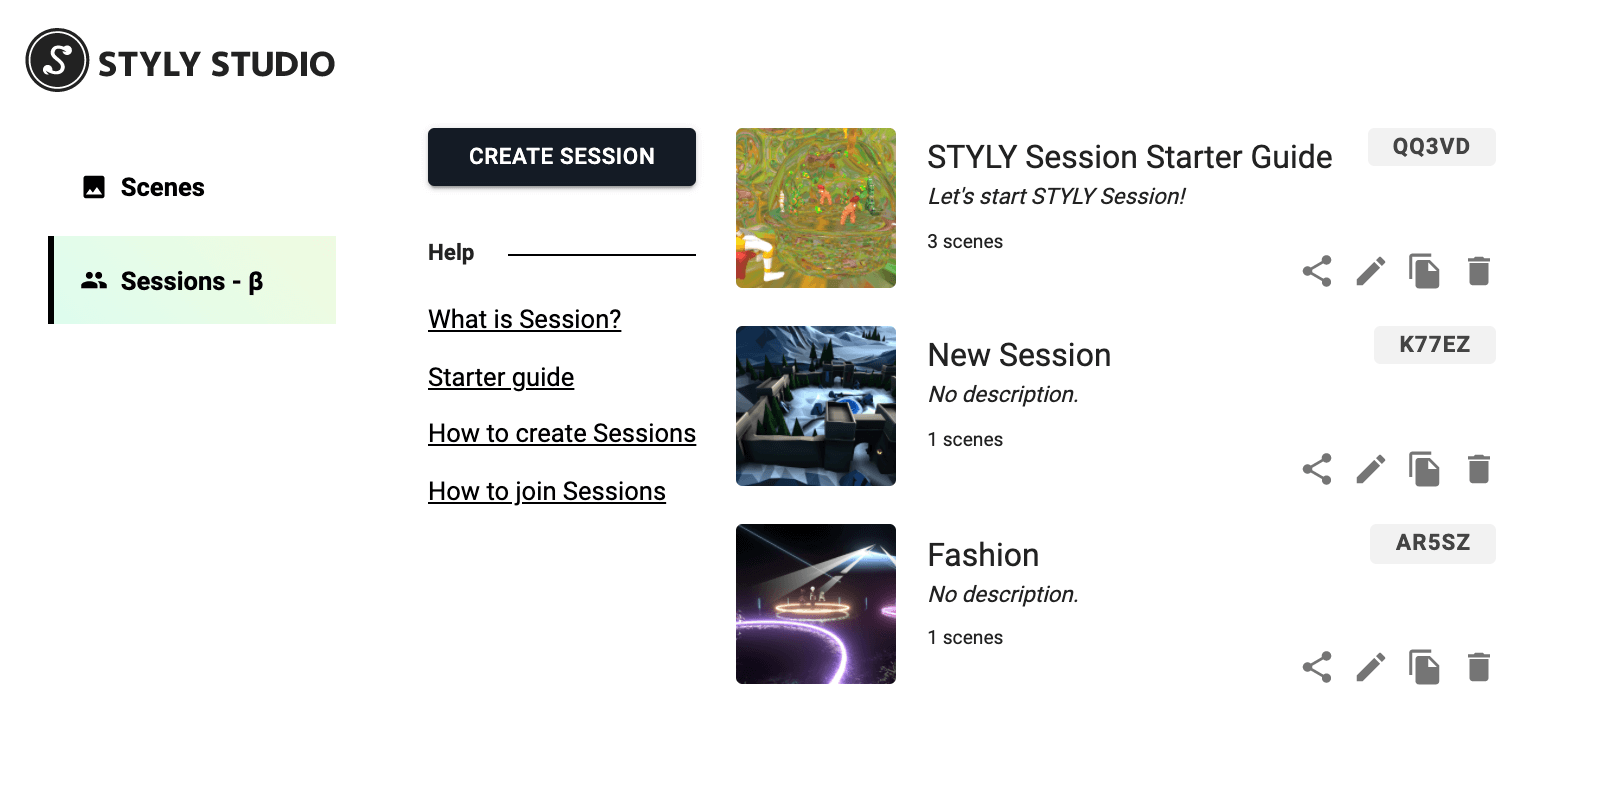 The session management screen